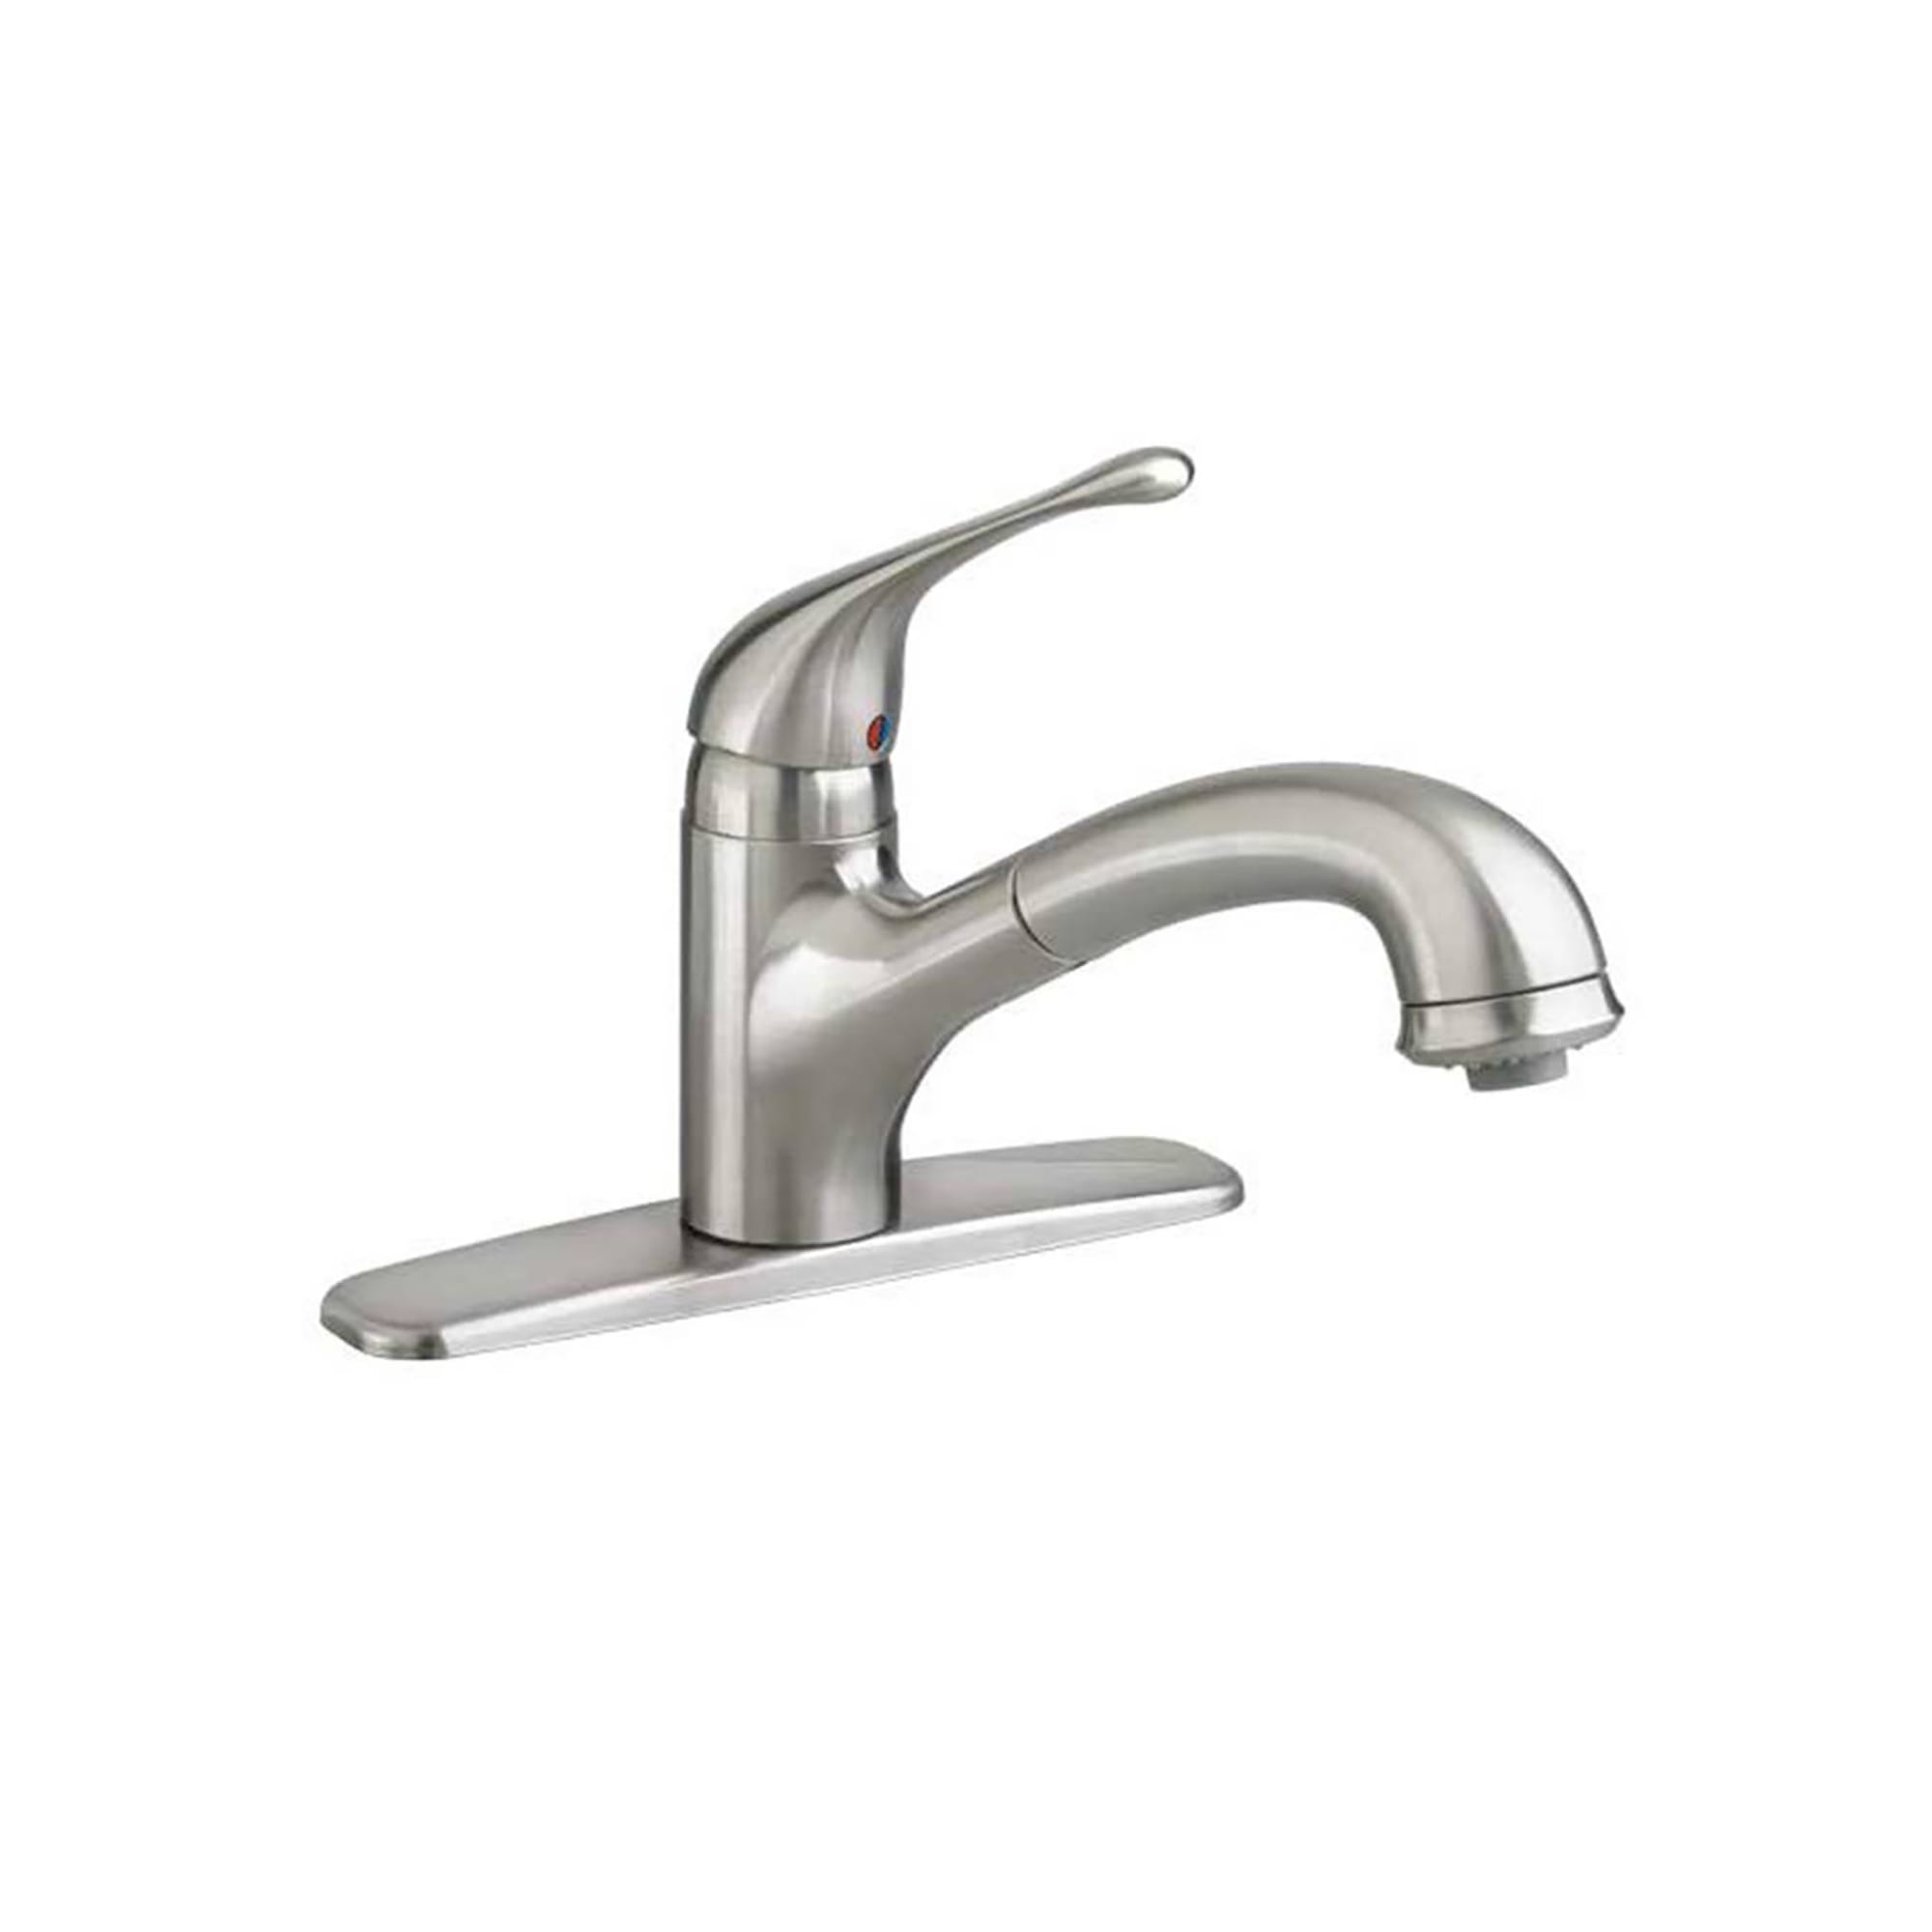 Colony Soft Single Handle Pull Out Dual Spray Kitchen Faucet 22 gpm 83 L min STAINLESS STL